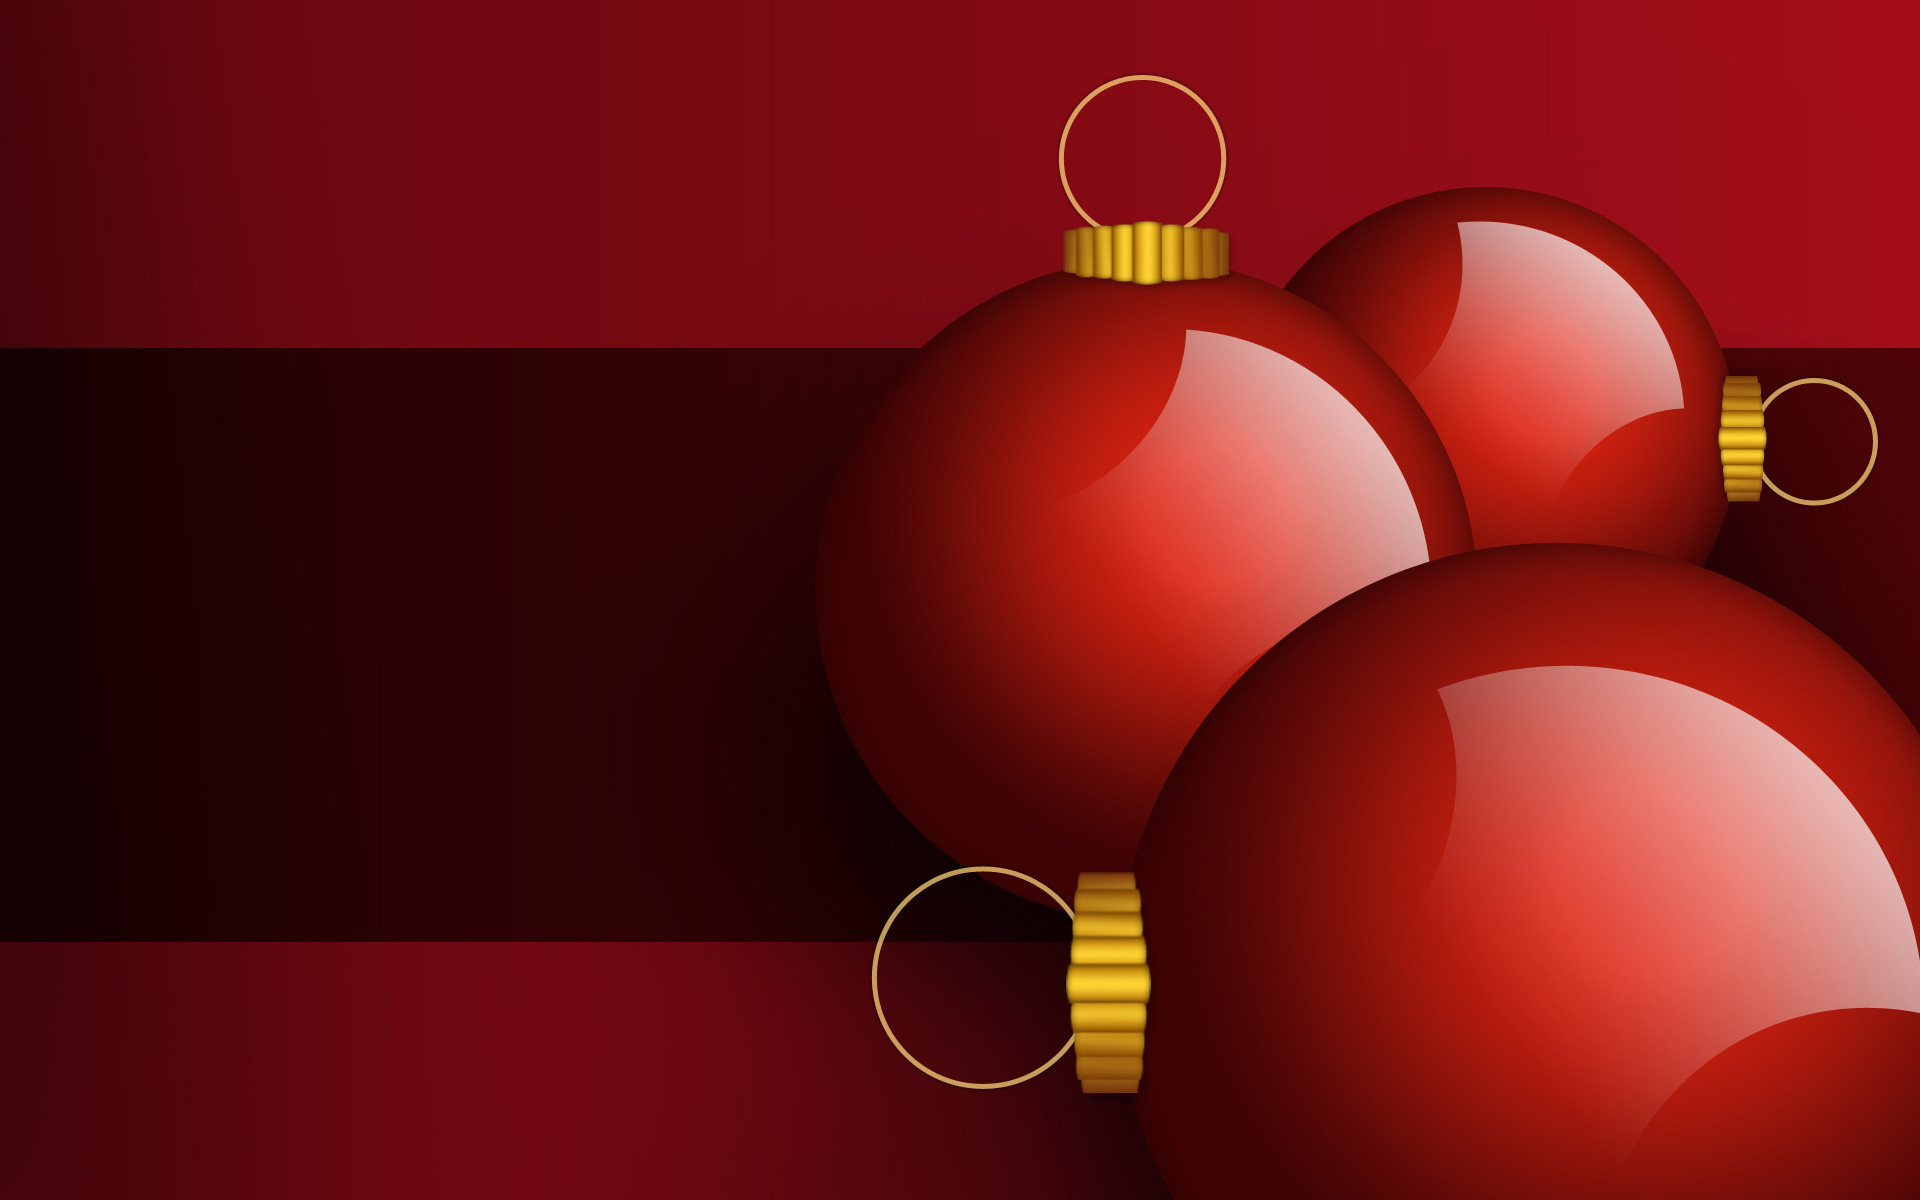 Design Christmas Card With Tree Balls In Photoshop - Christmas Card Designs Photoshop - HD Wallpaper 